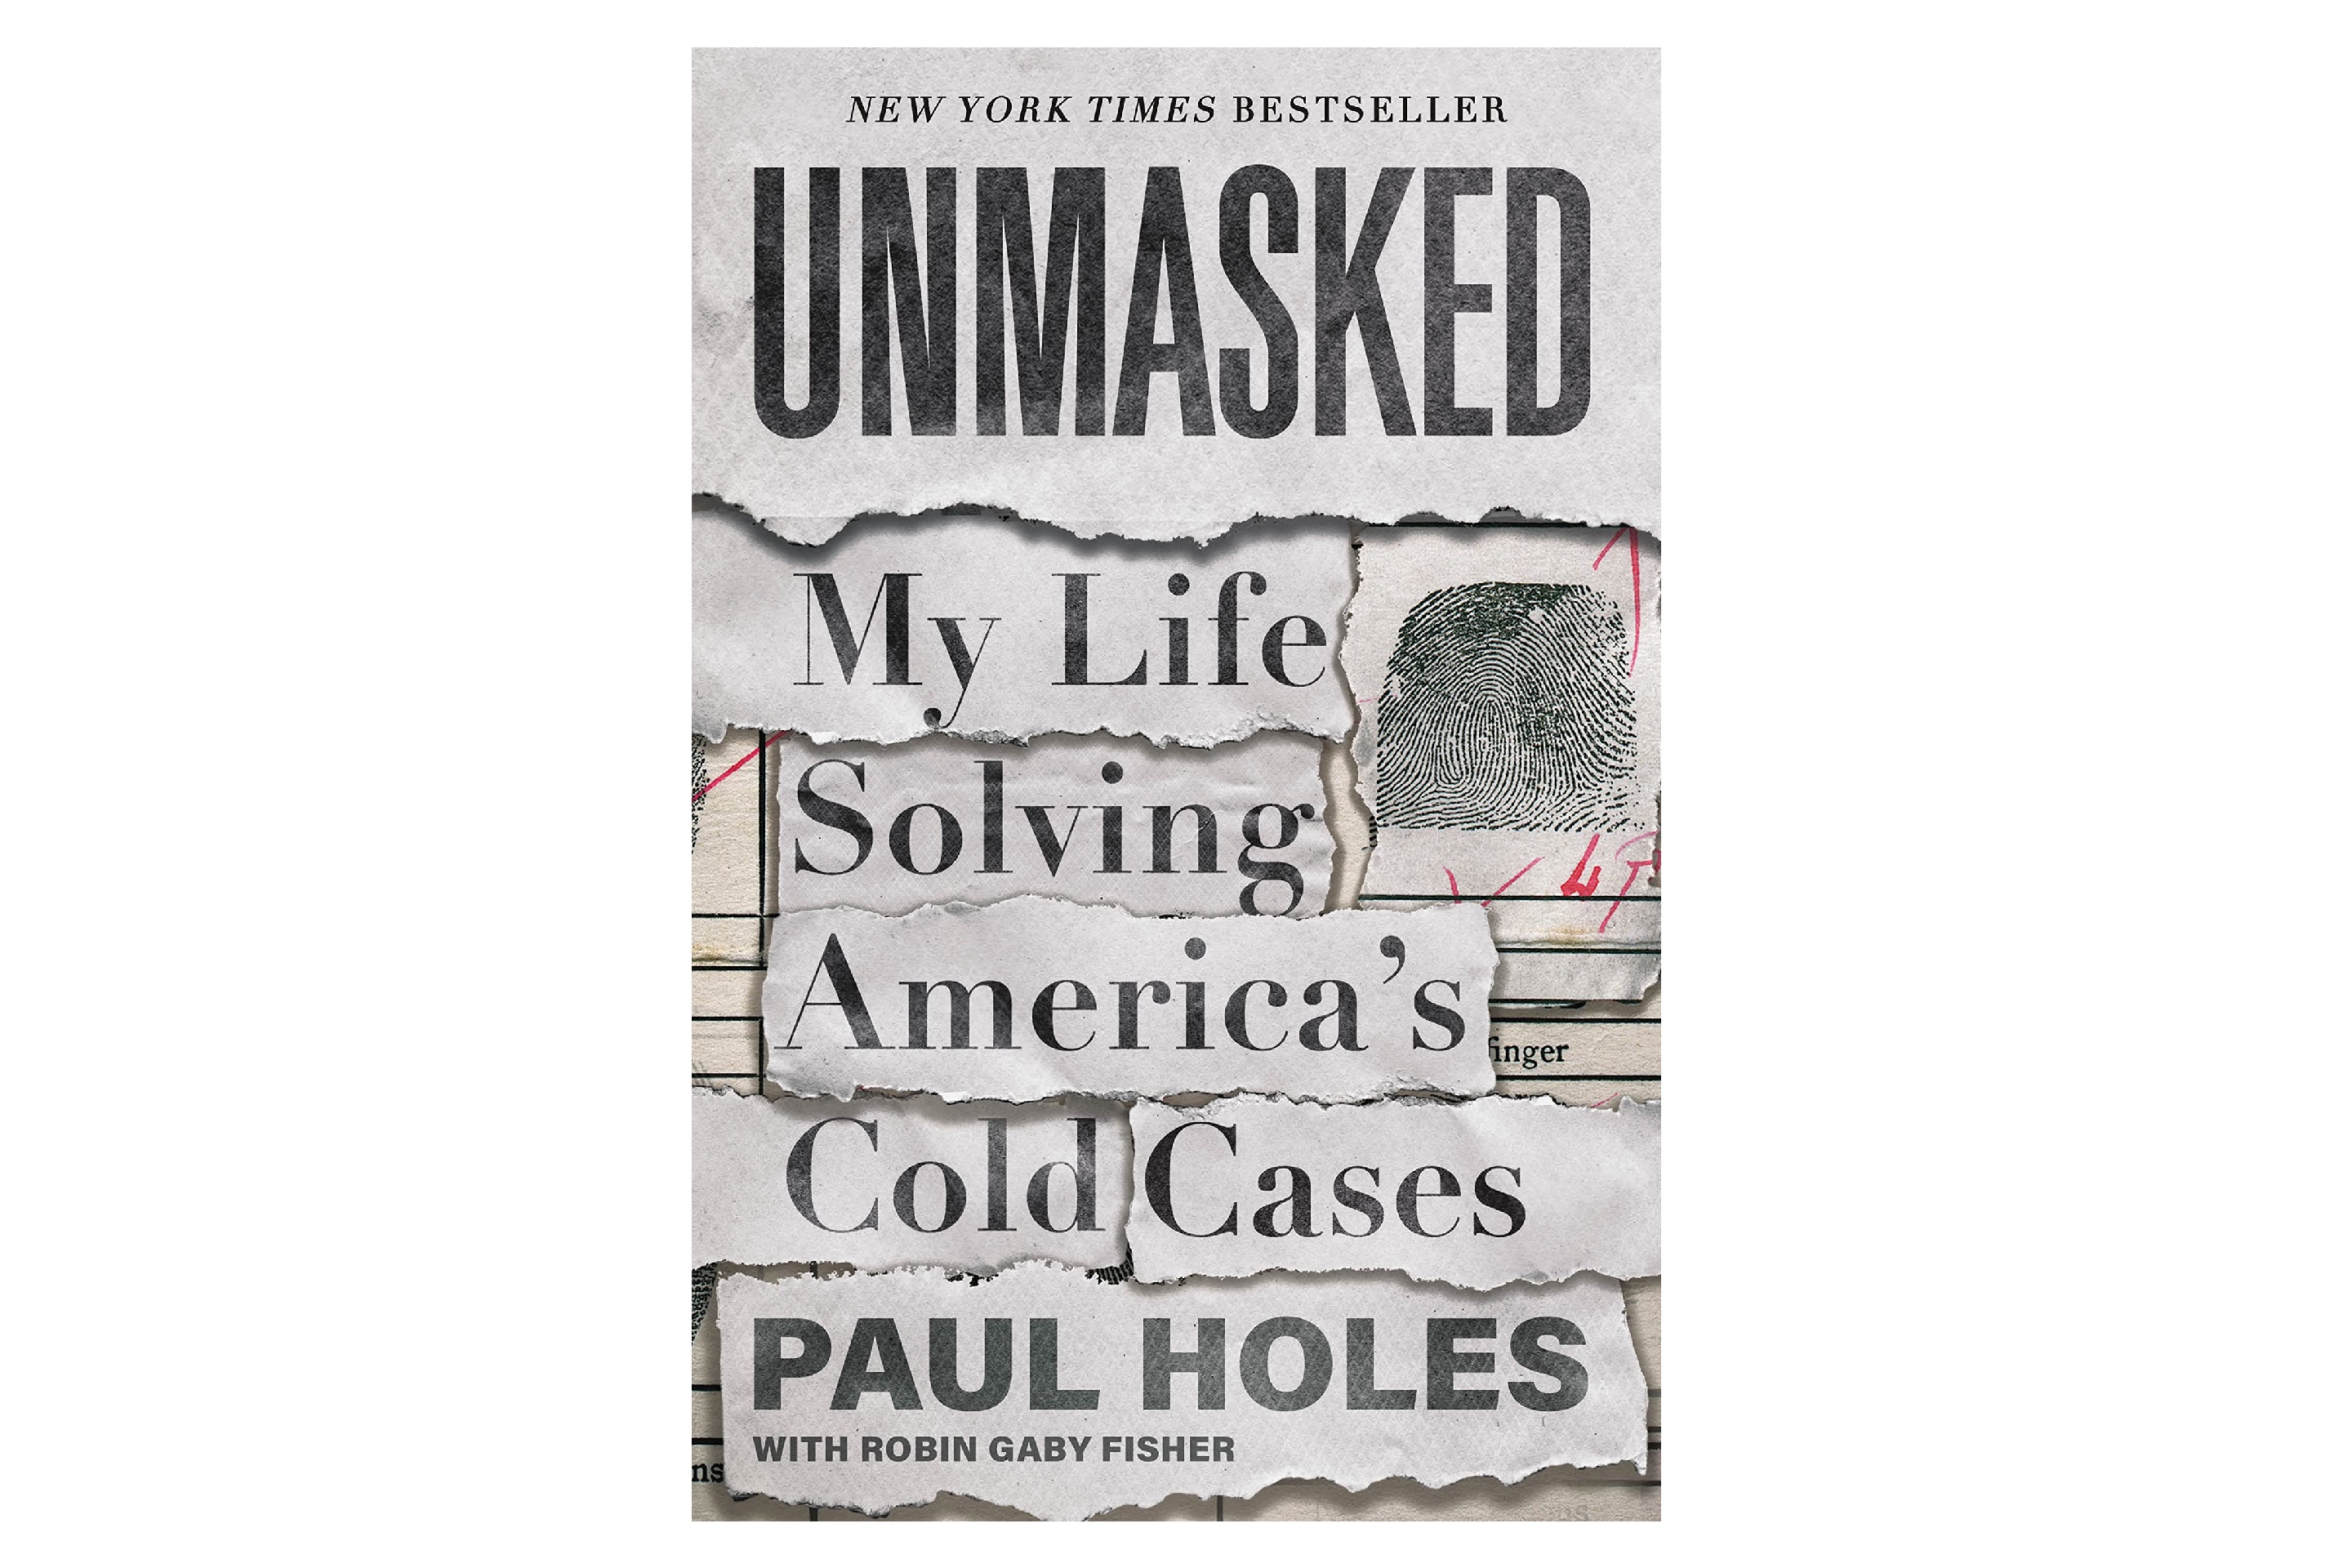 Unmasked: My Life Solving America's Cold Cases